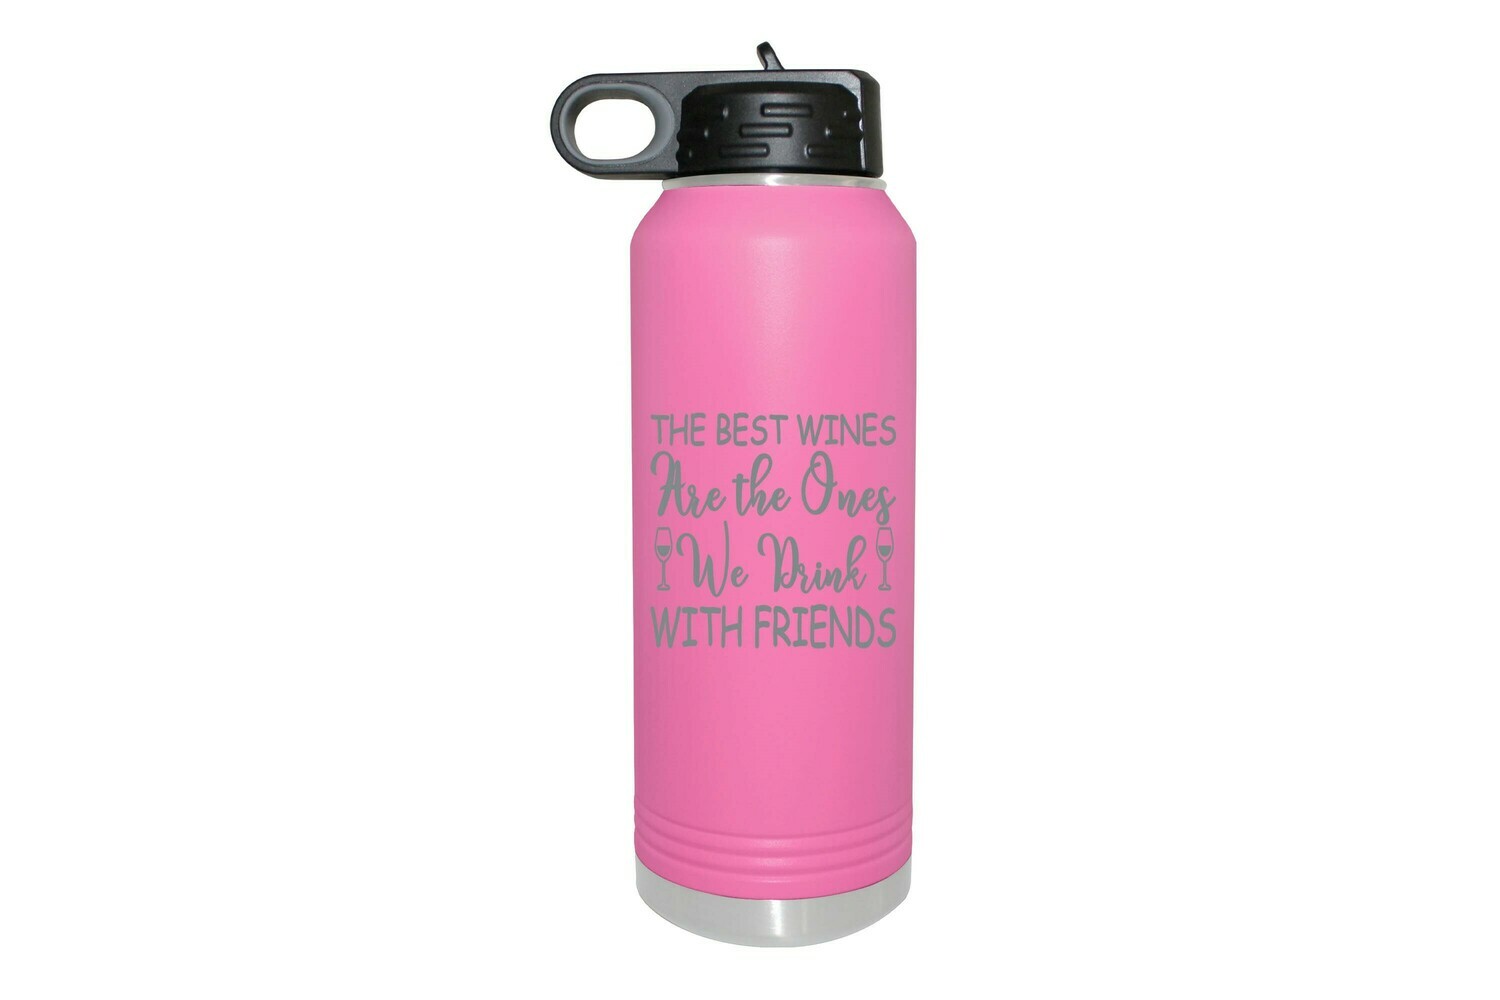 The Best Wines are the Ones We Drink with Friends Insulated Water Bottle 32 oz